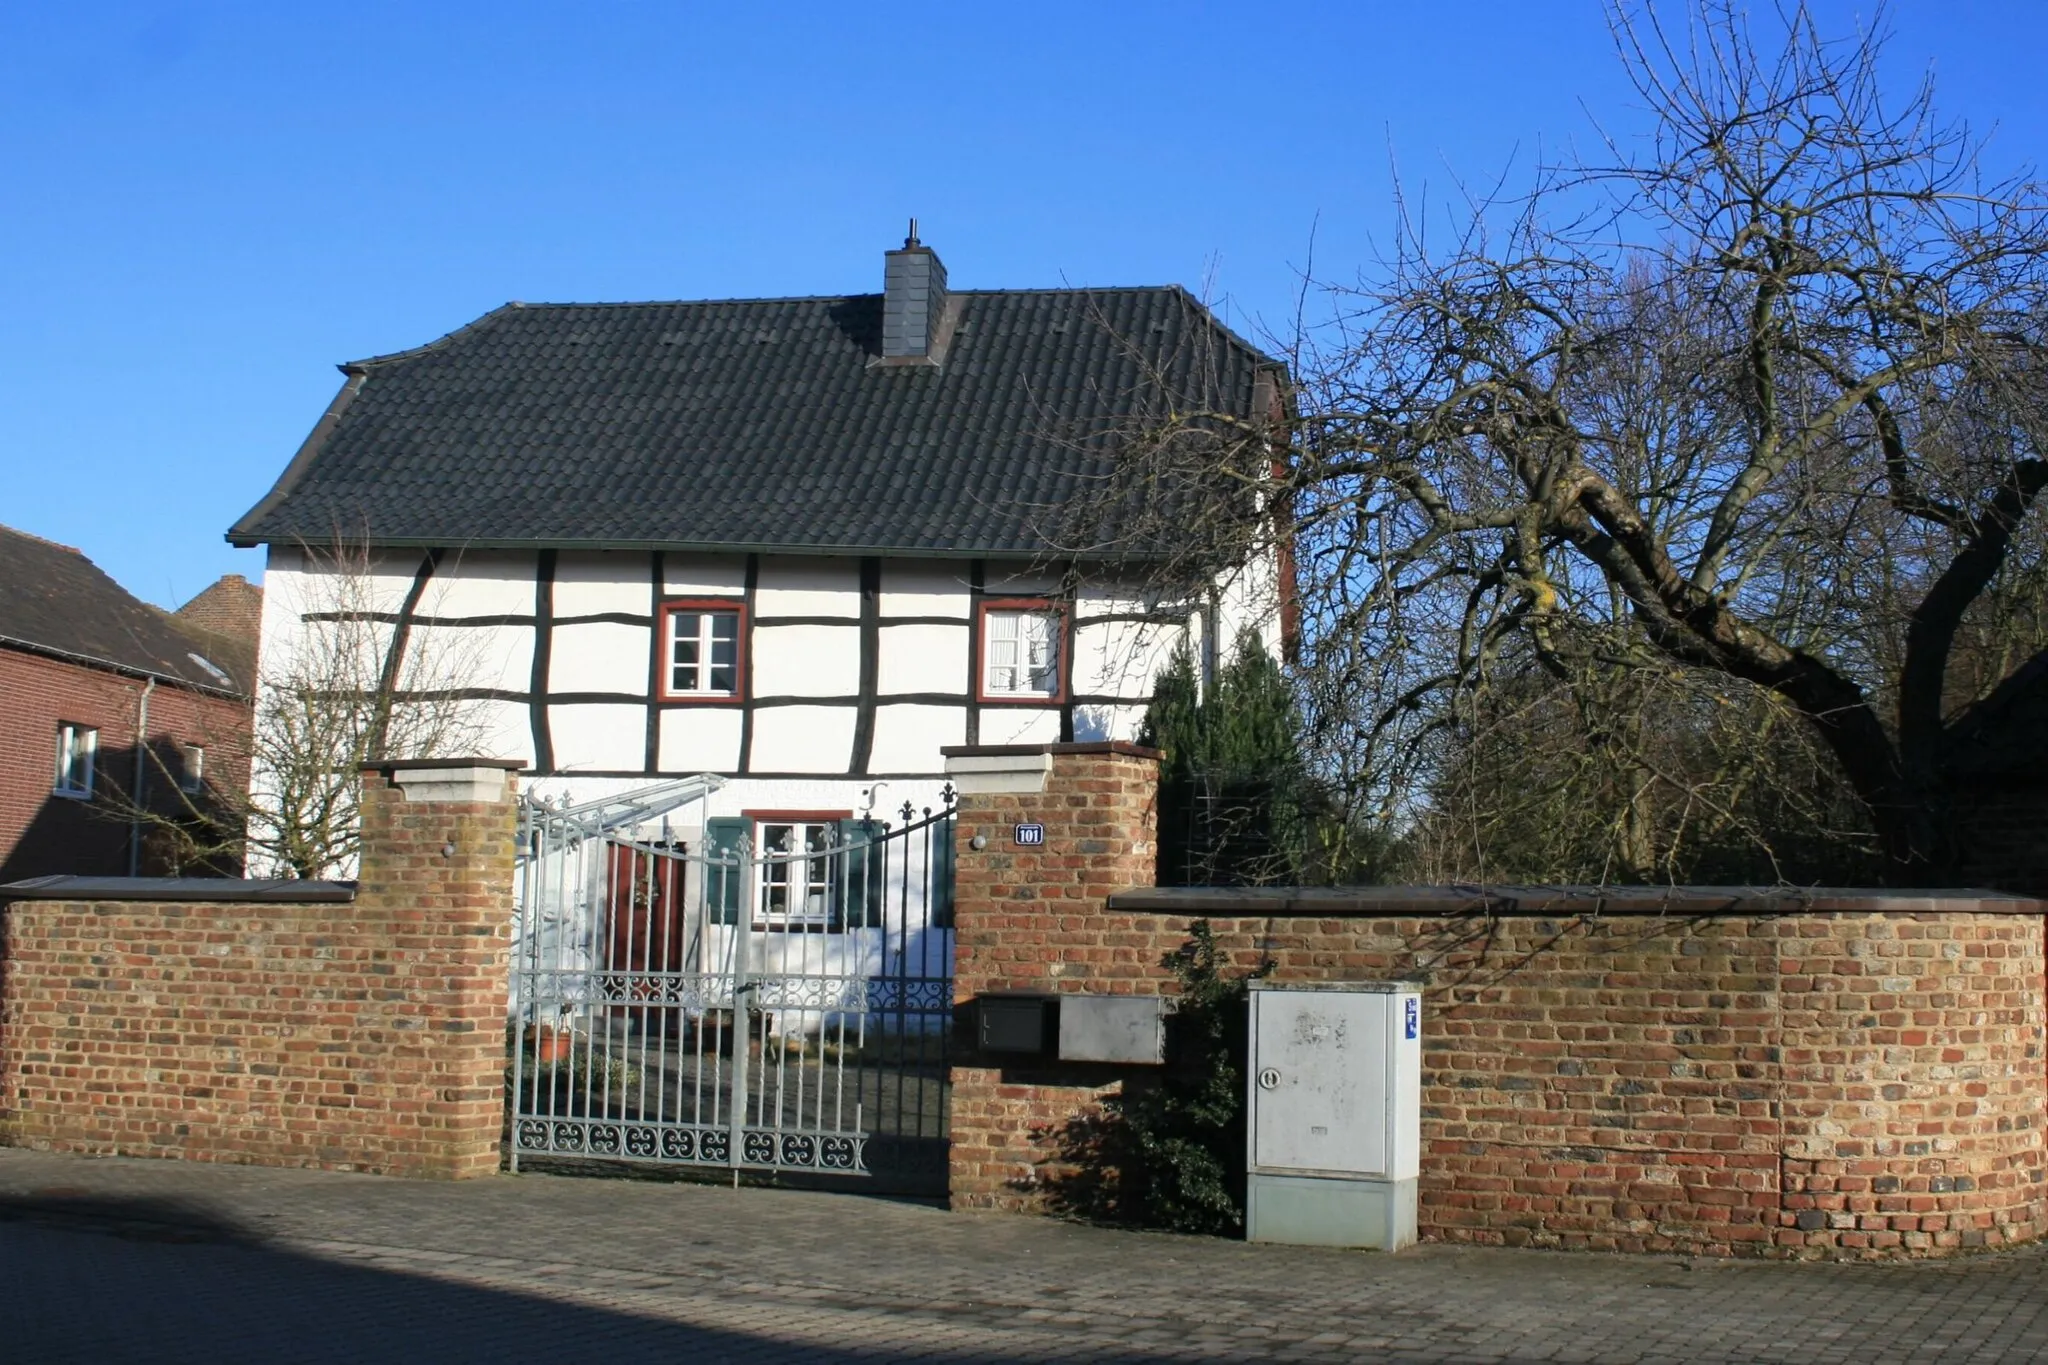 Photo showing: Cultural heritage monument No. 16 in Jülich